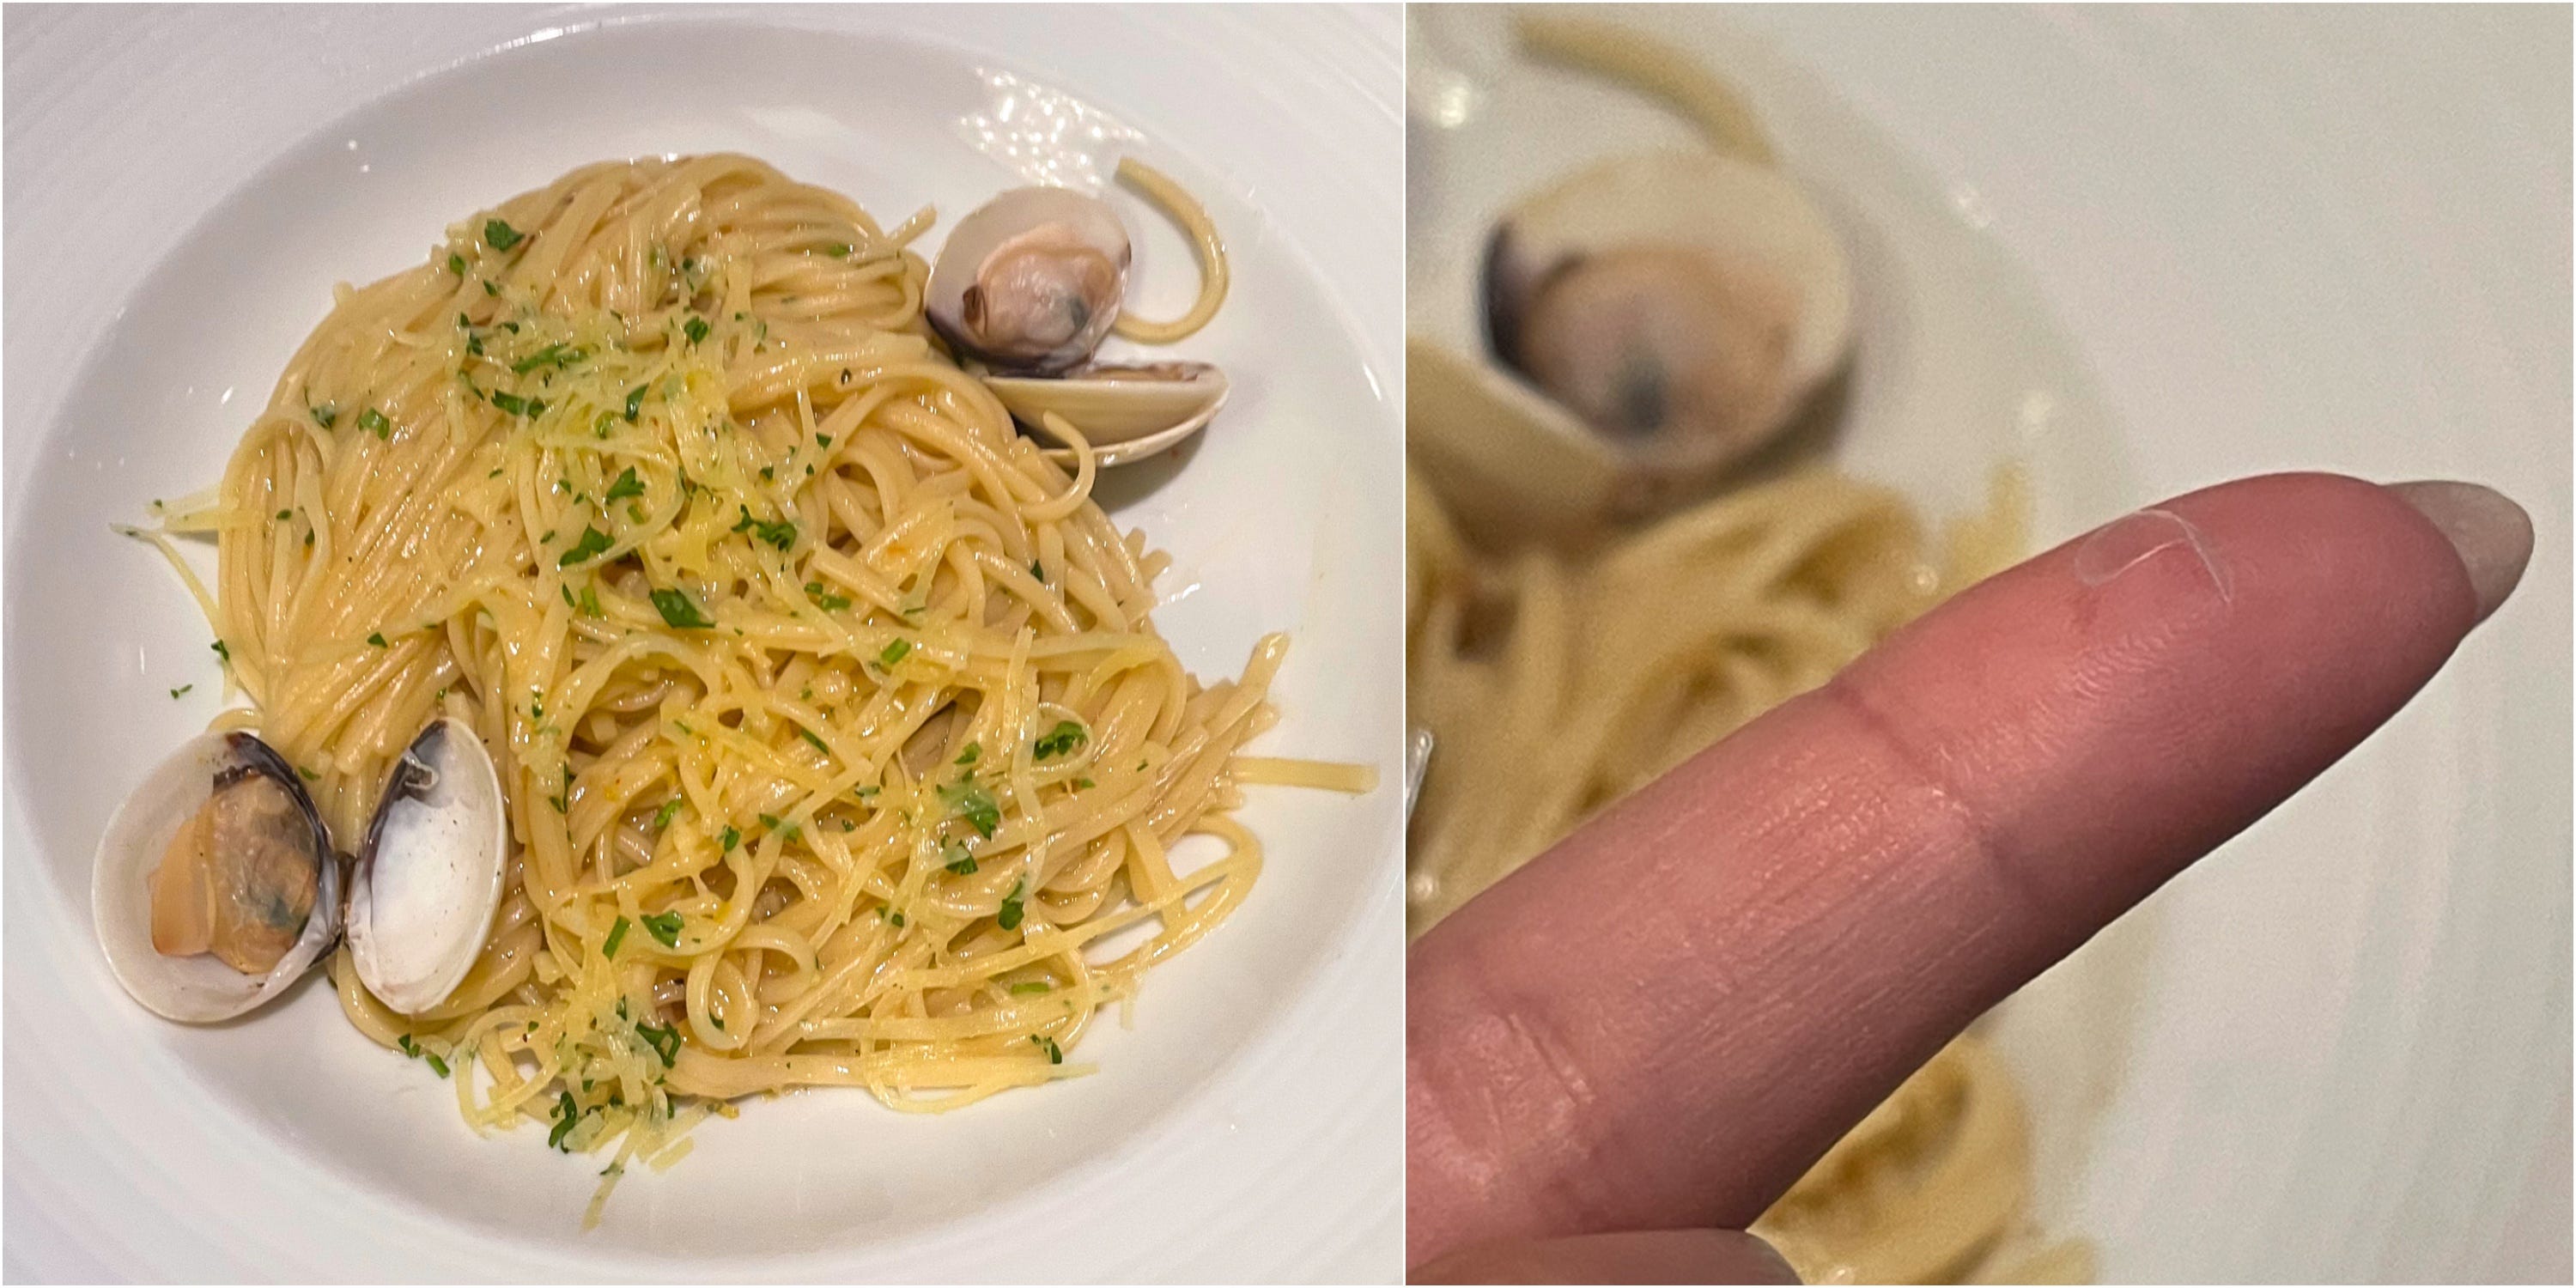 <p>I didn't love that it came with only four or five clams, but I do love pasta dishes with a contrasting texture!</p><p>Unfortunately, said "texture" was a hard, small piece of plastic hidden among the mound of noodles.</p>